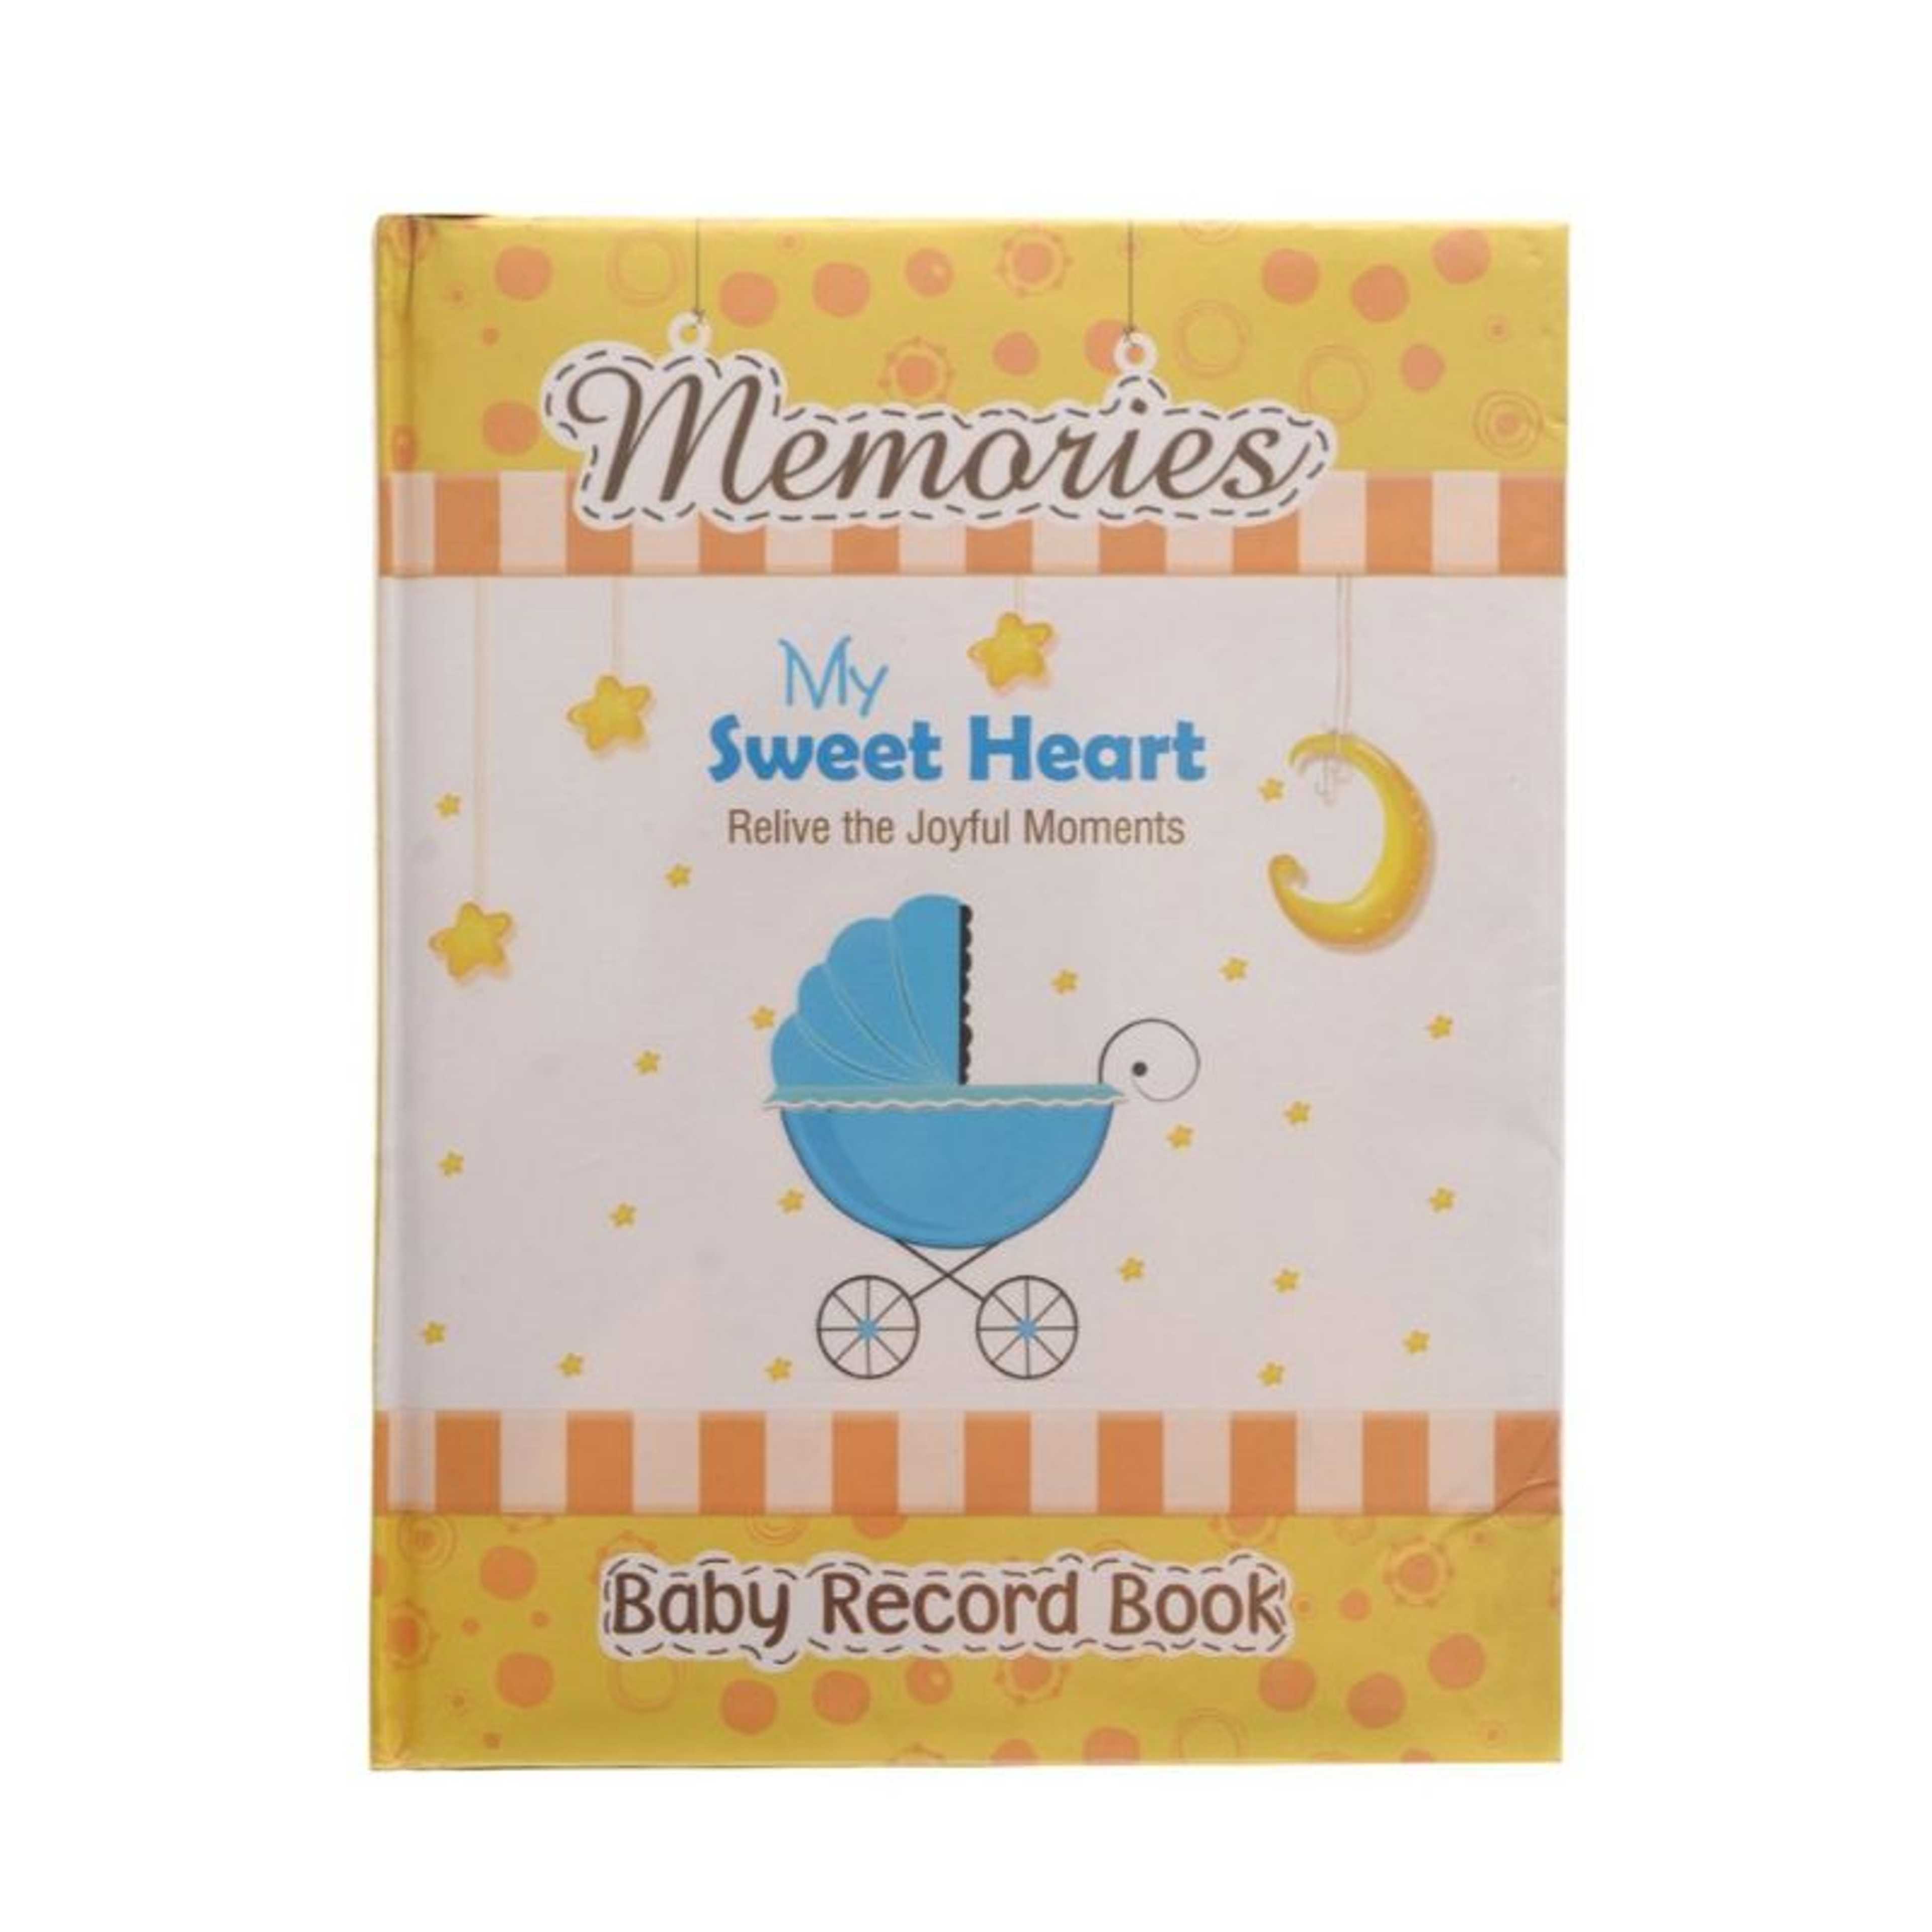 My Sweet Heart Memories Baby Record Book (Can use for both Boy & Girl Both) Memory Book - My First Picture Book (Yellow)